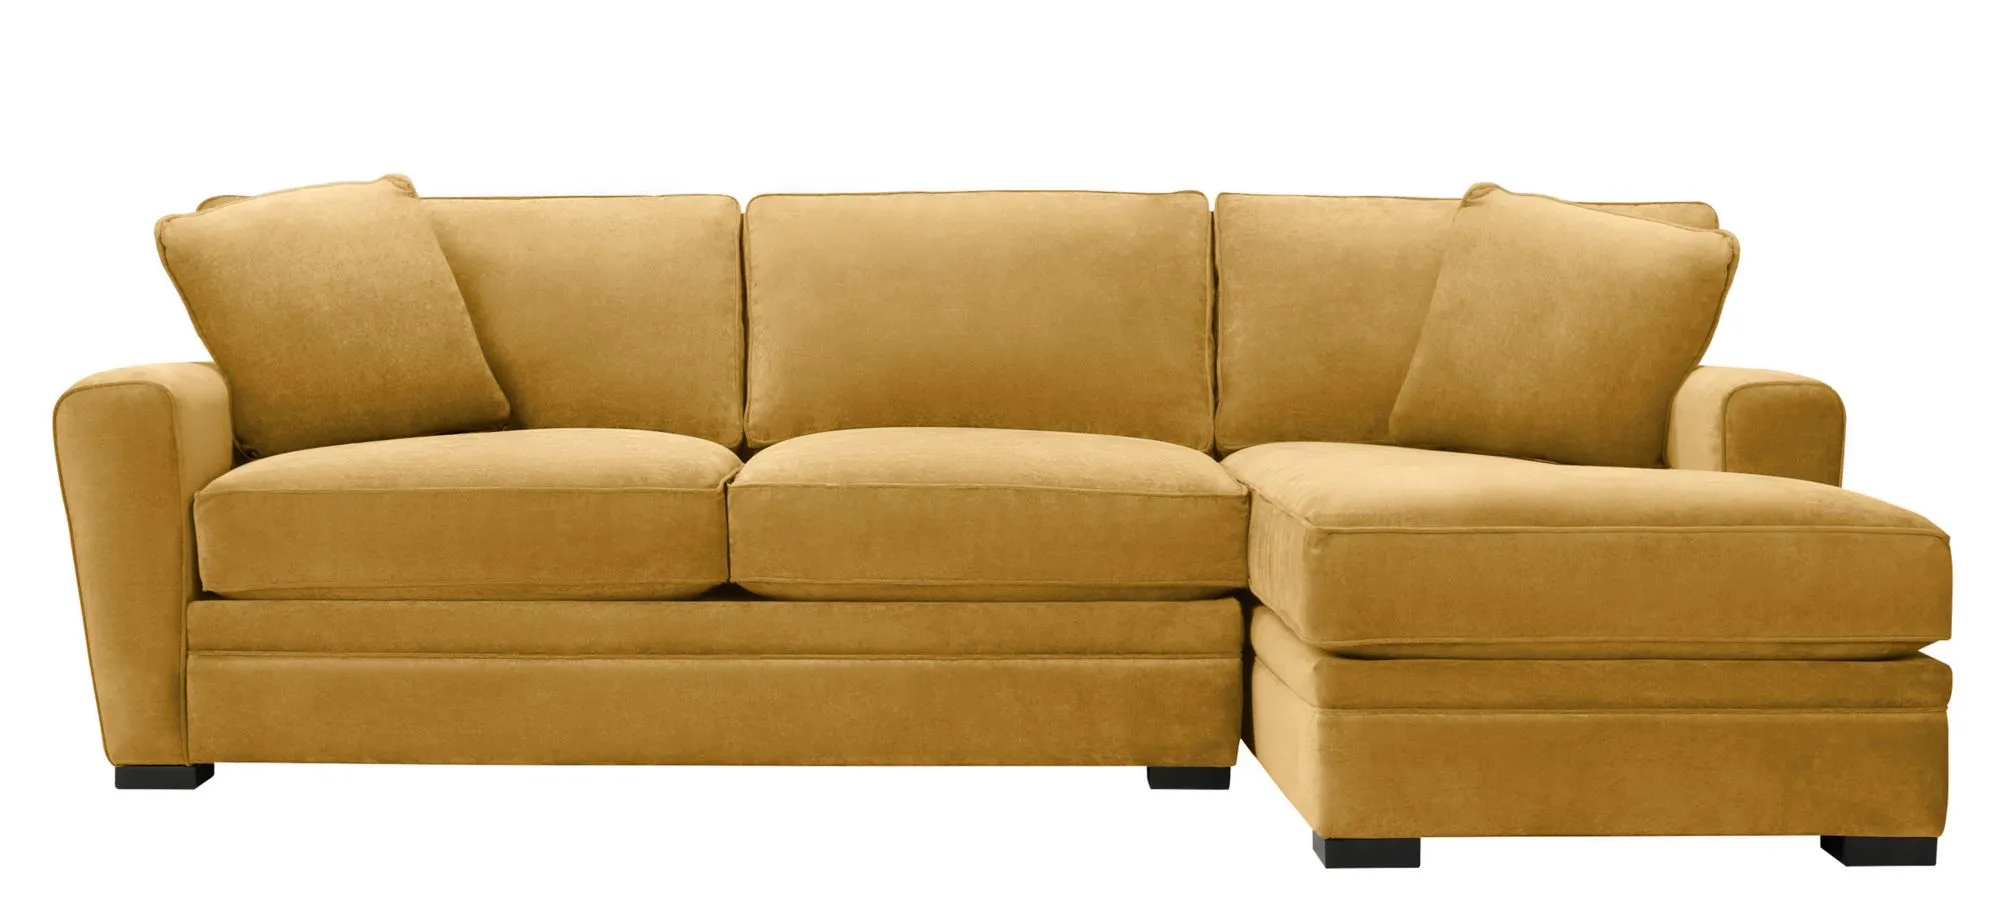 Artemis II 2-pc. Right Hand Facing Sectional Sofa in Gypsy Arrow by Jonathan Louis